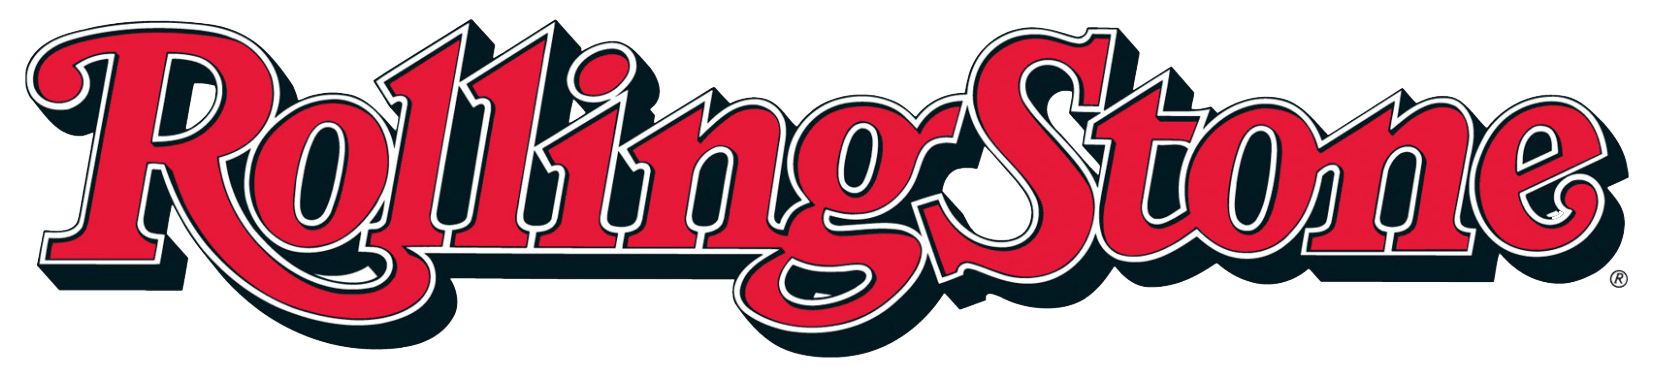 New Rolling Stone Logo - Rolling Stones Png Logo Transparent PNG Logos